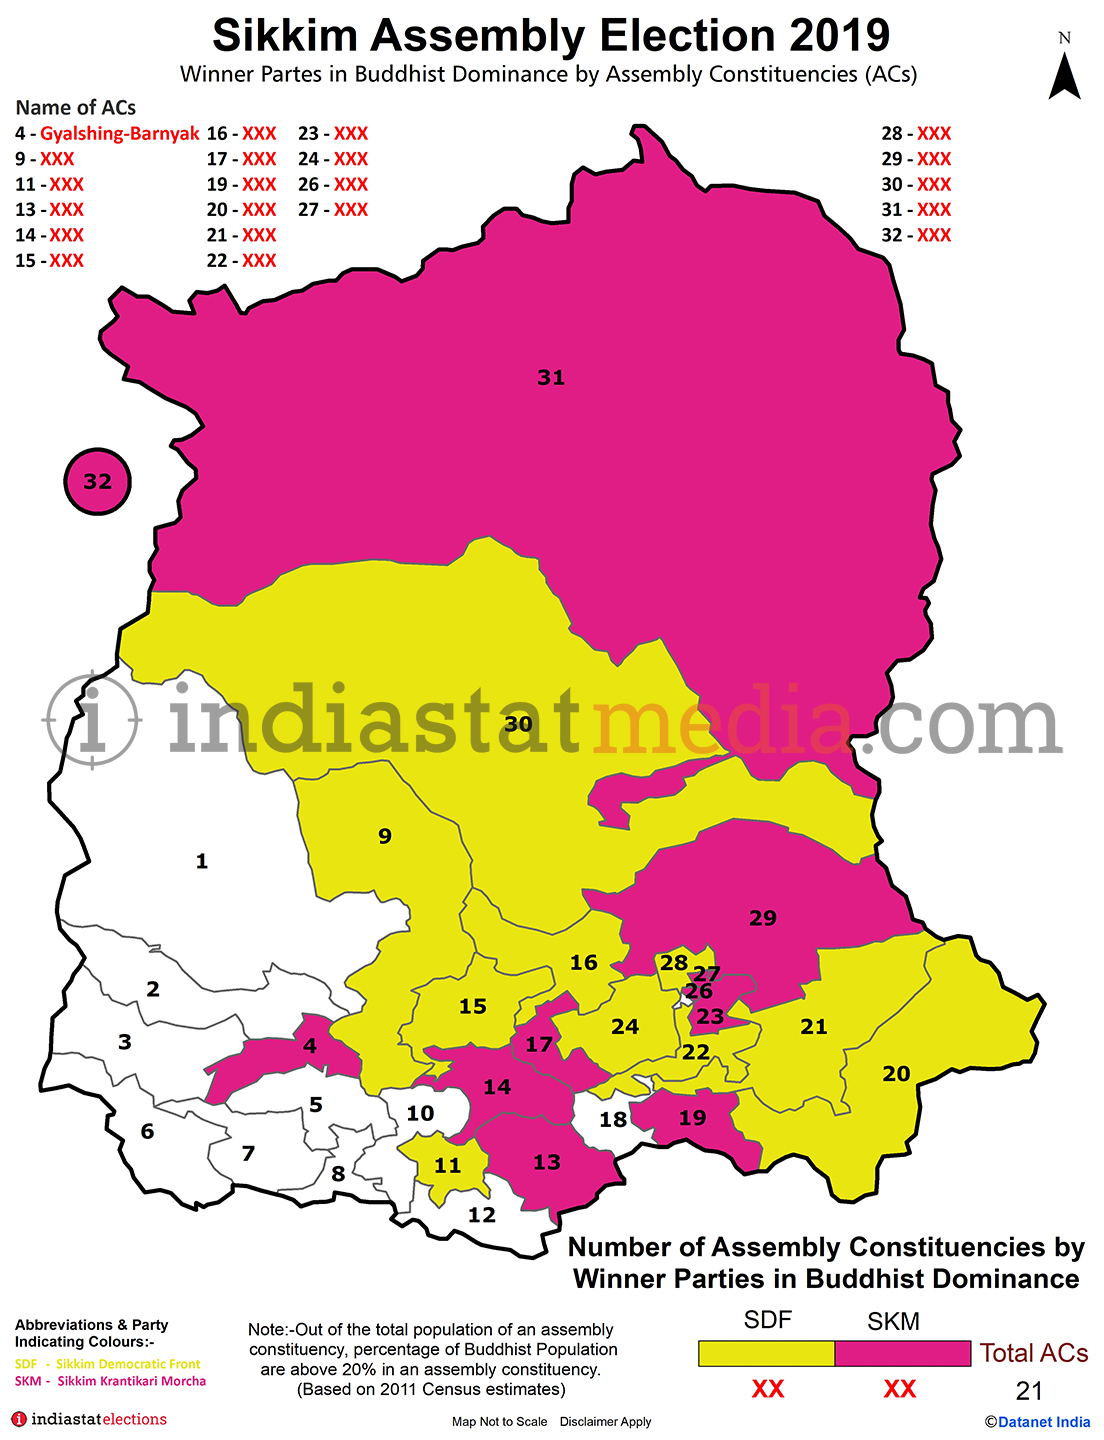 Winner Parties in Buddhist Dominance by Constituencies in Sikkim (Assembly Election - 2019)